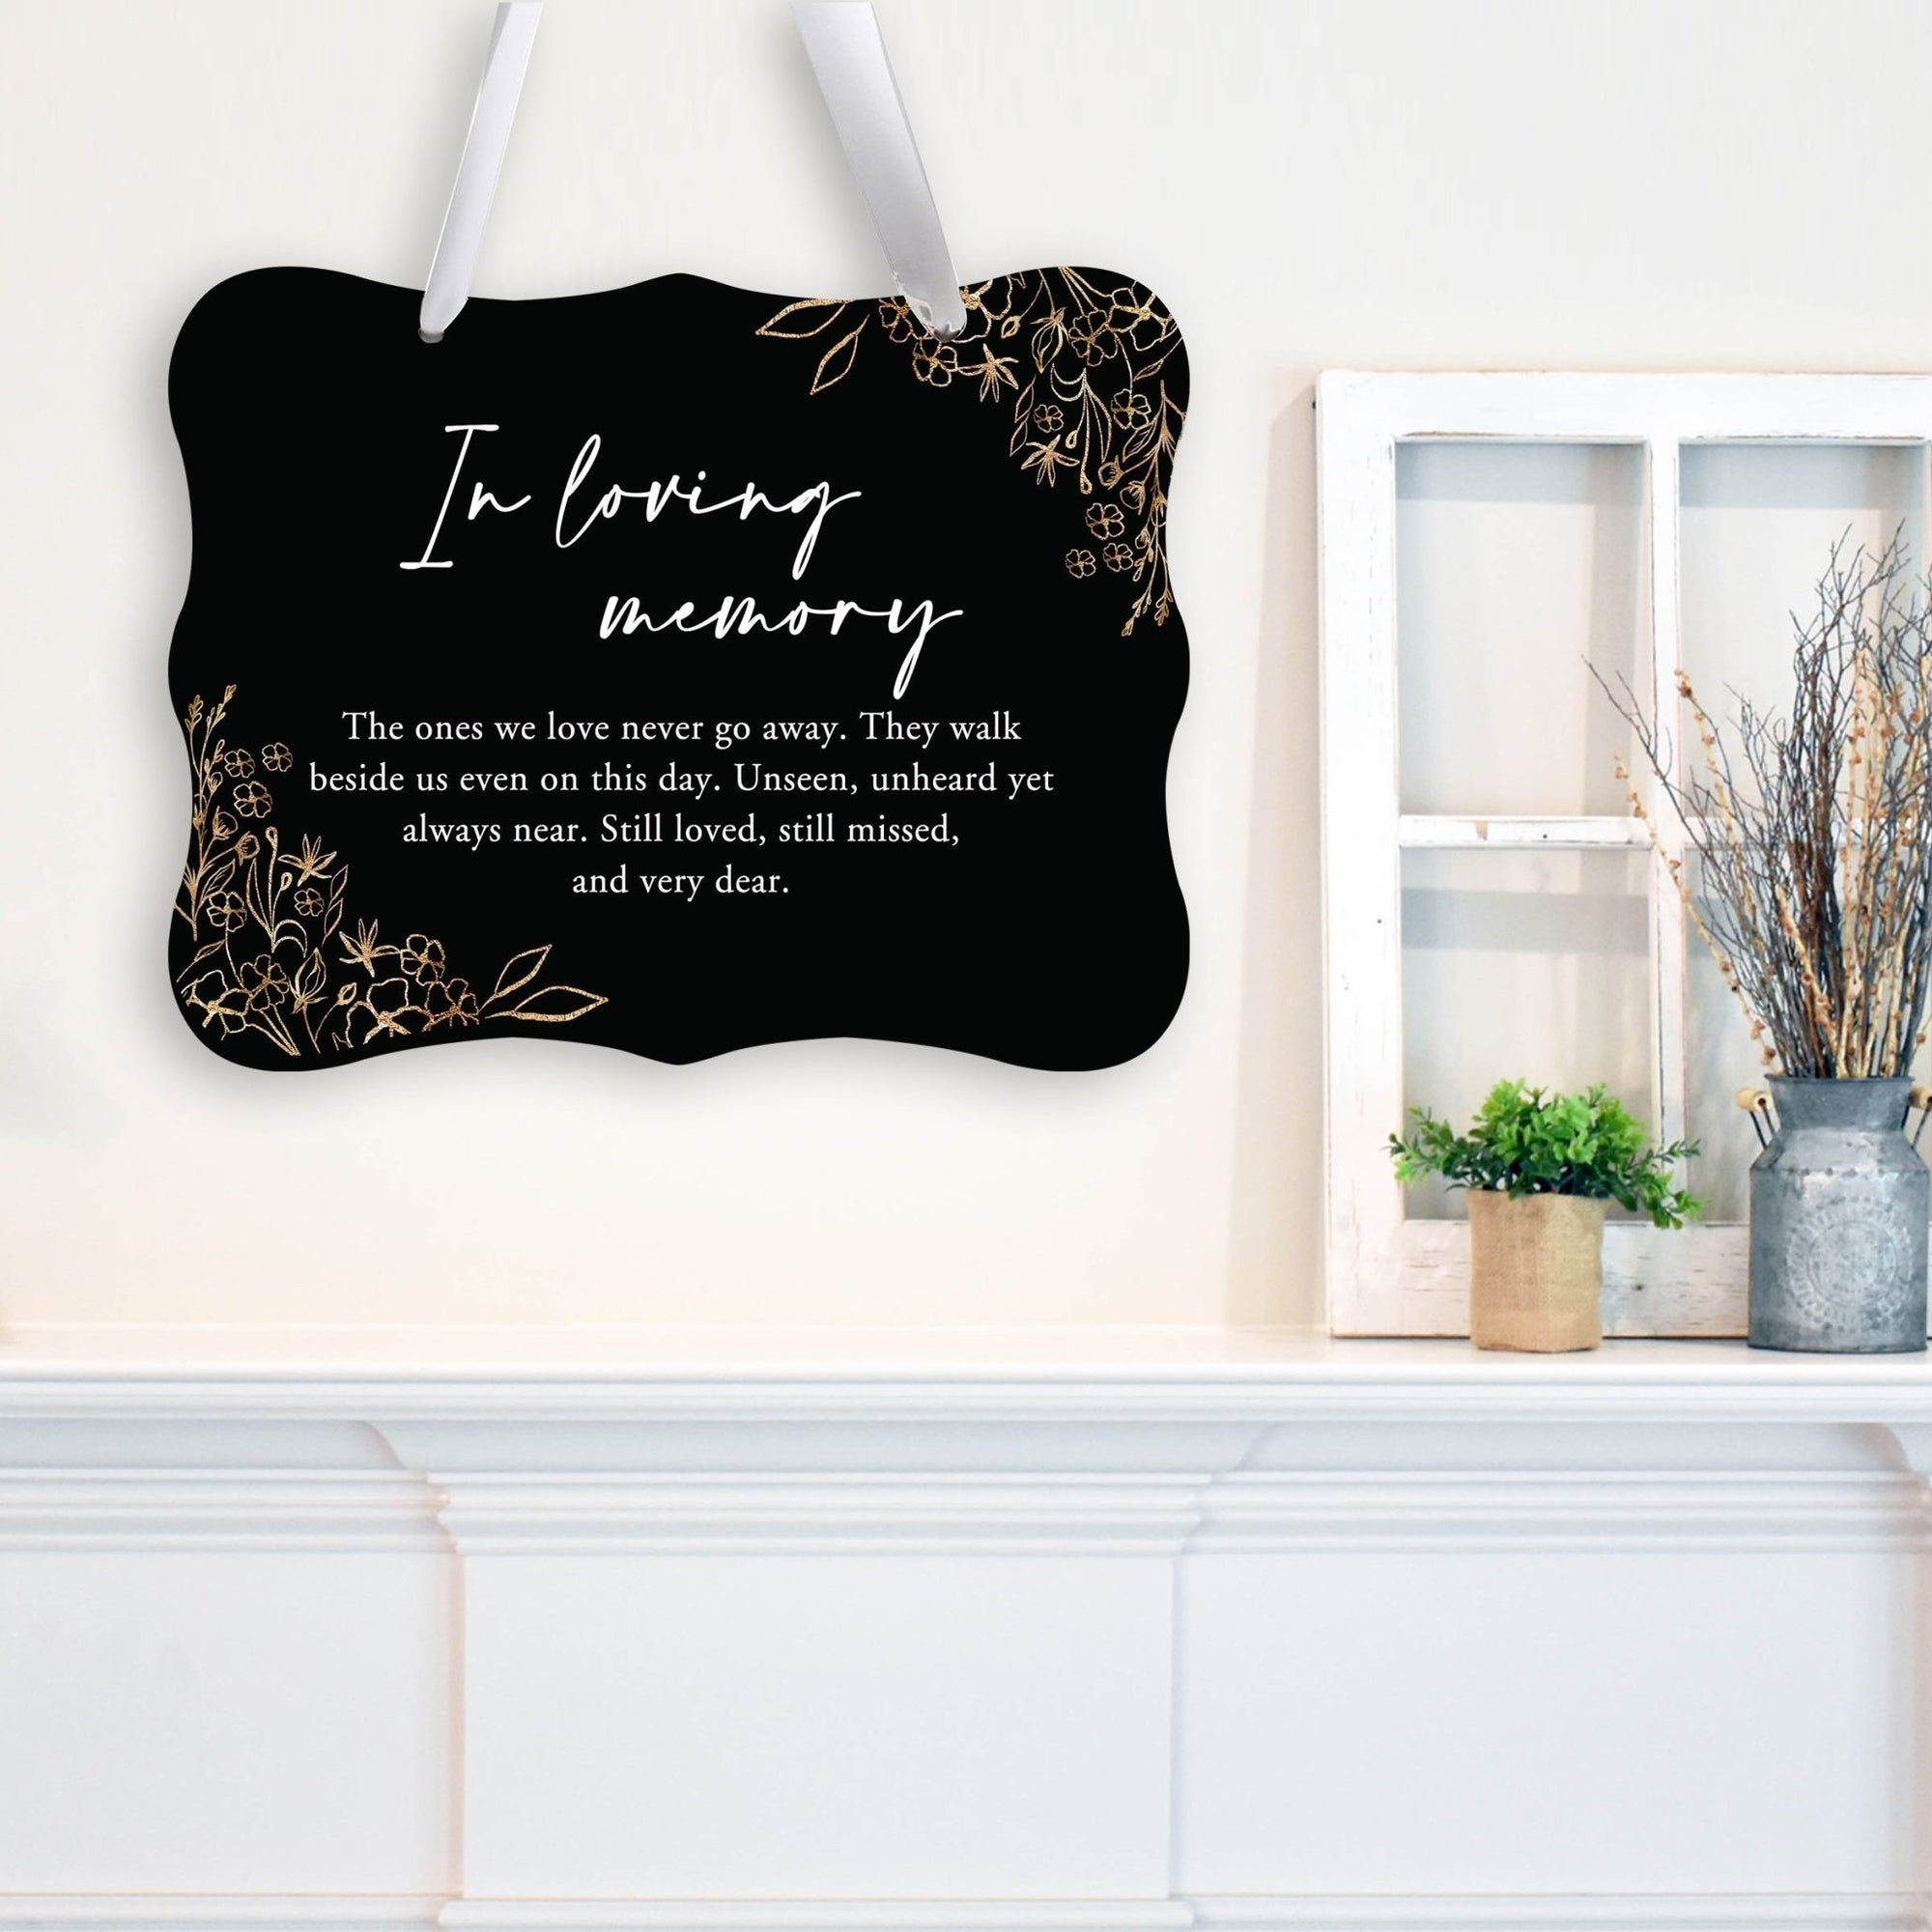 Memorial Hanging Ribbon Wall Decor for Loss of Loved One - In Loving Memory - LifeSong Milestones